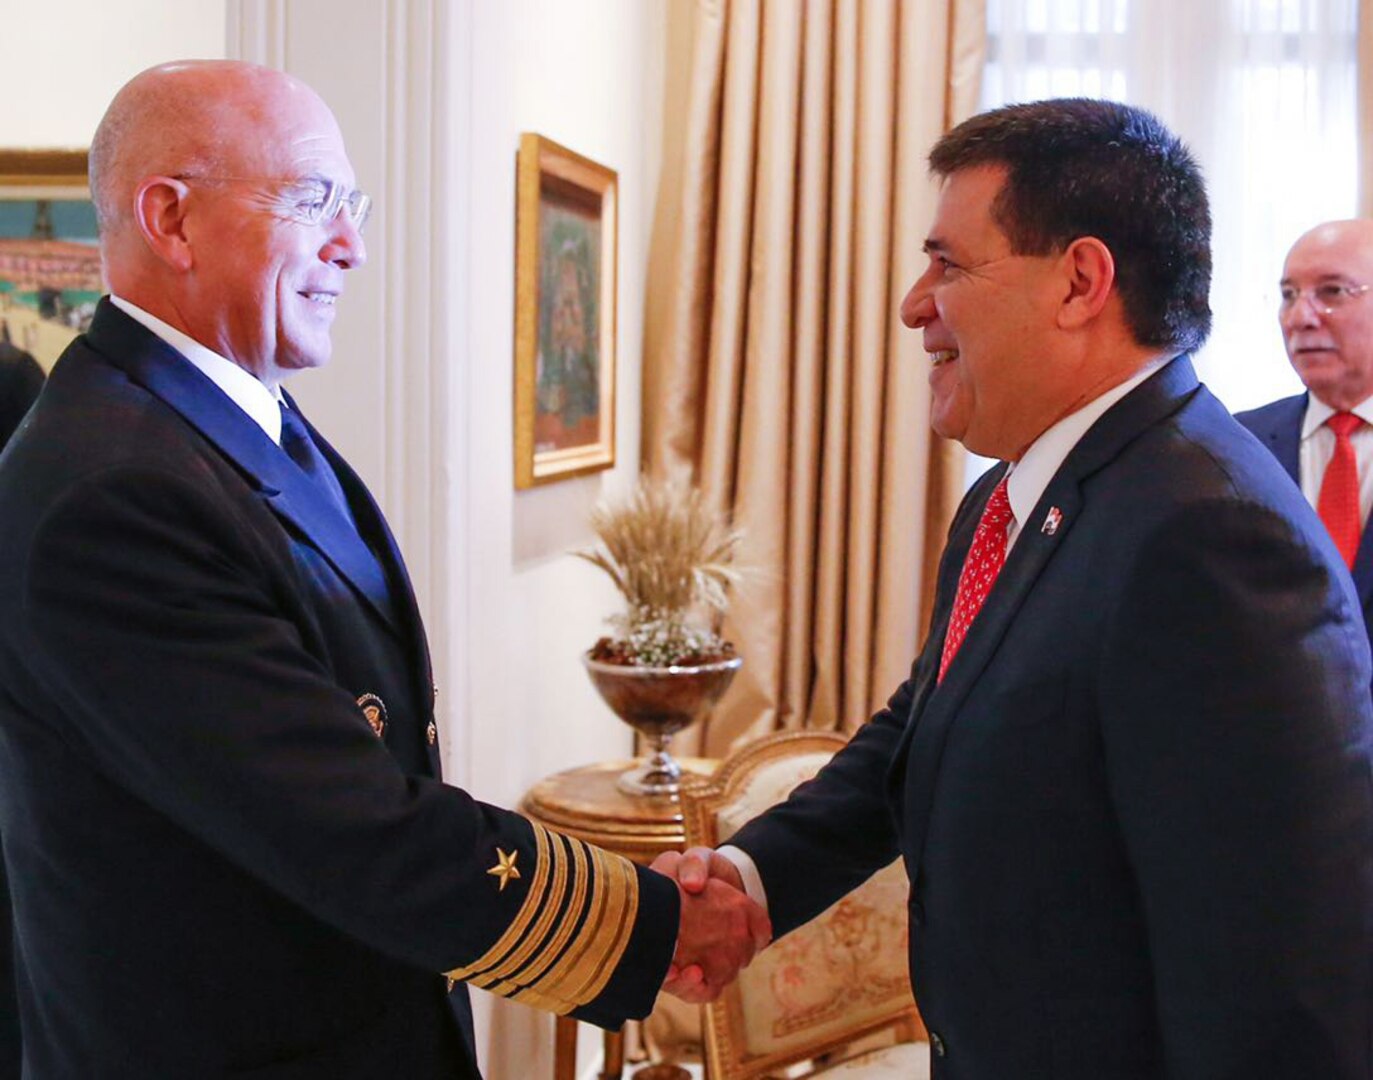 ASUNCIÓN, Paraguay -- Paraguayan President Horacio Cartés and U.S. Navy Adm. Kurt W. Tidd, commander of U.S. Southern Command, meet at the Palacio de los López to discuss defense cooperation efforts. Tidd is in Paraguay to meet the nation's leaders and to engage with senior regional security officials during the annual Fuerzas Comando multinational special operations skills competition. (Photo courtesy of the Office of the President of Paraguay)